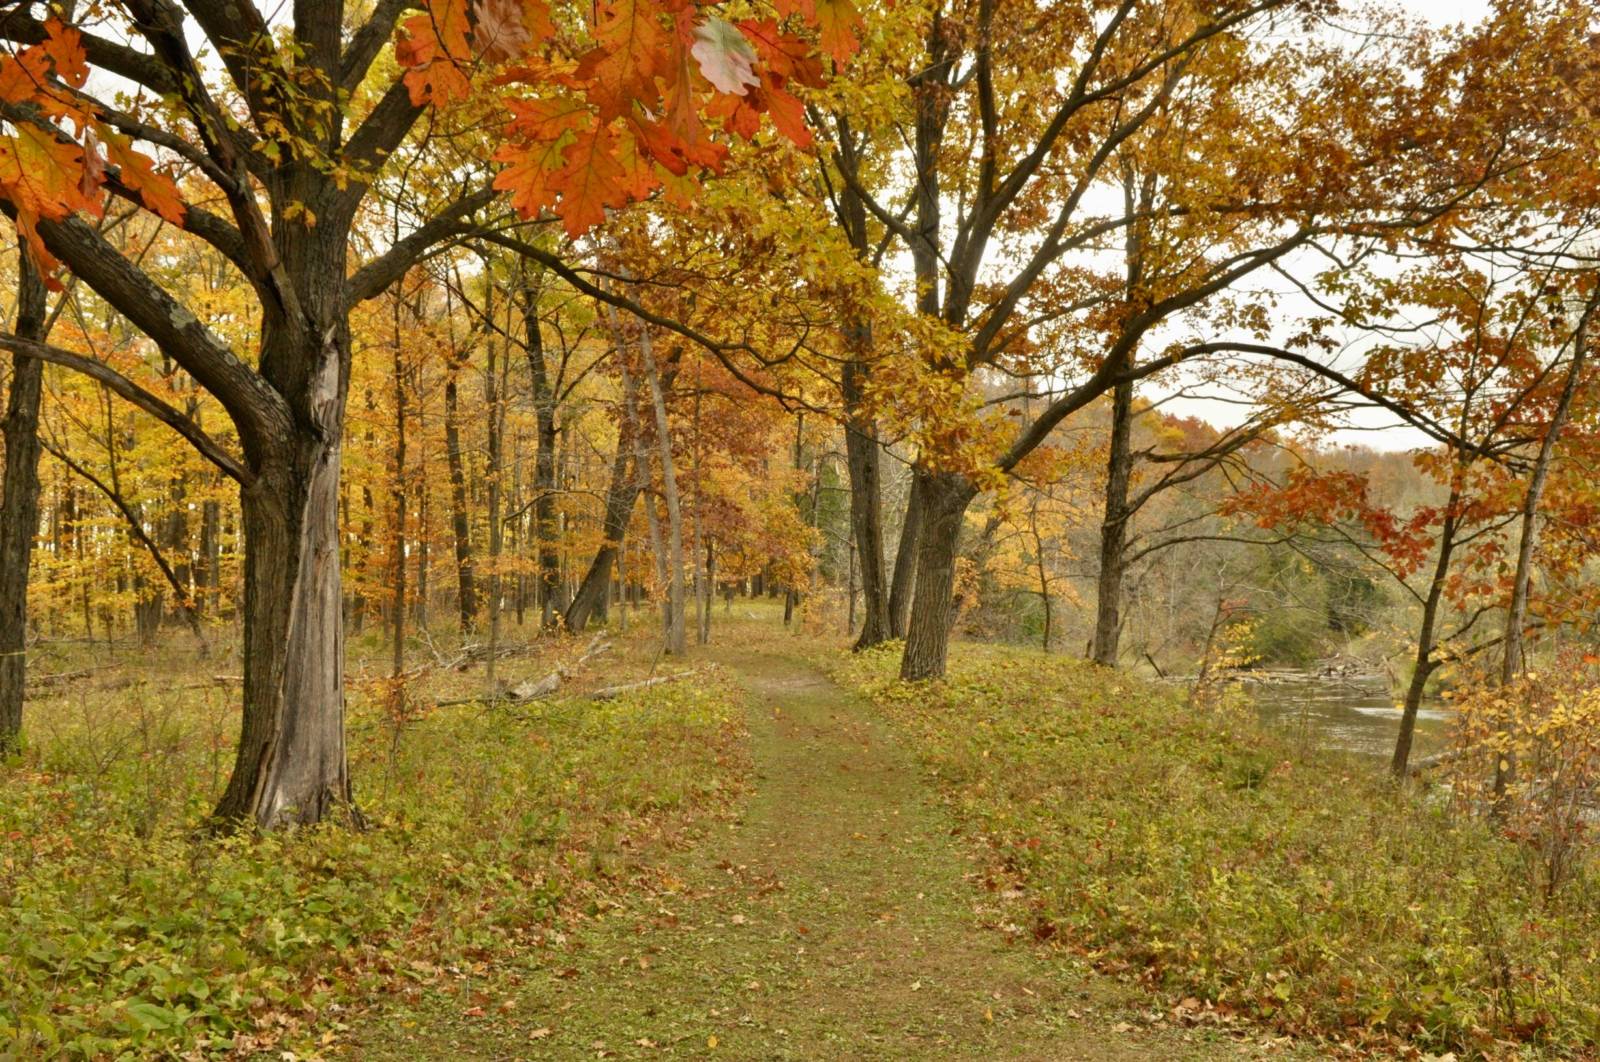 scenic view of a hiking trail through a colorful autumn forest